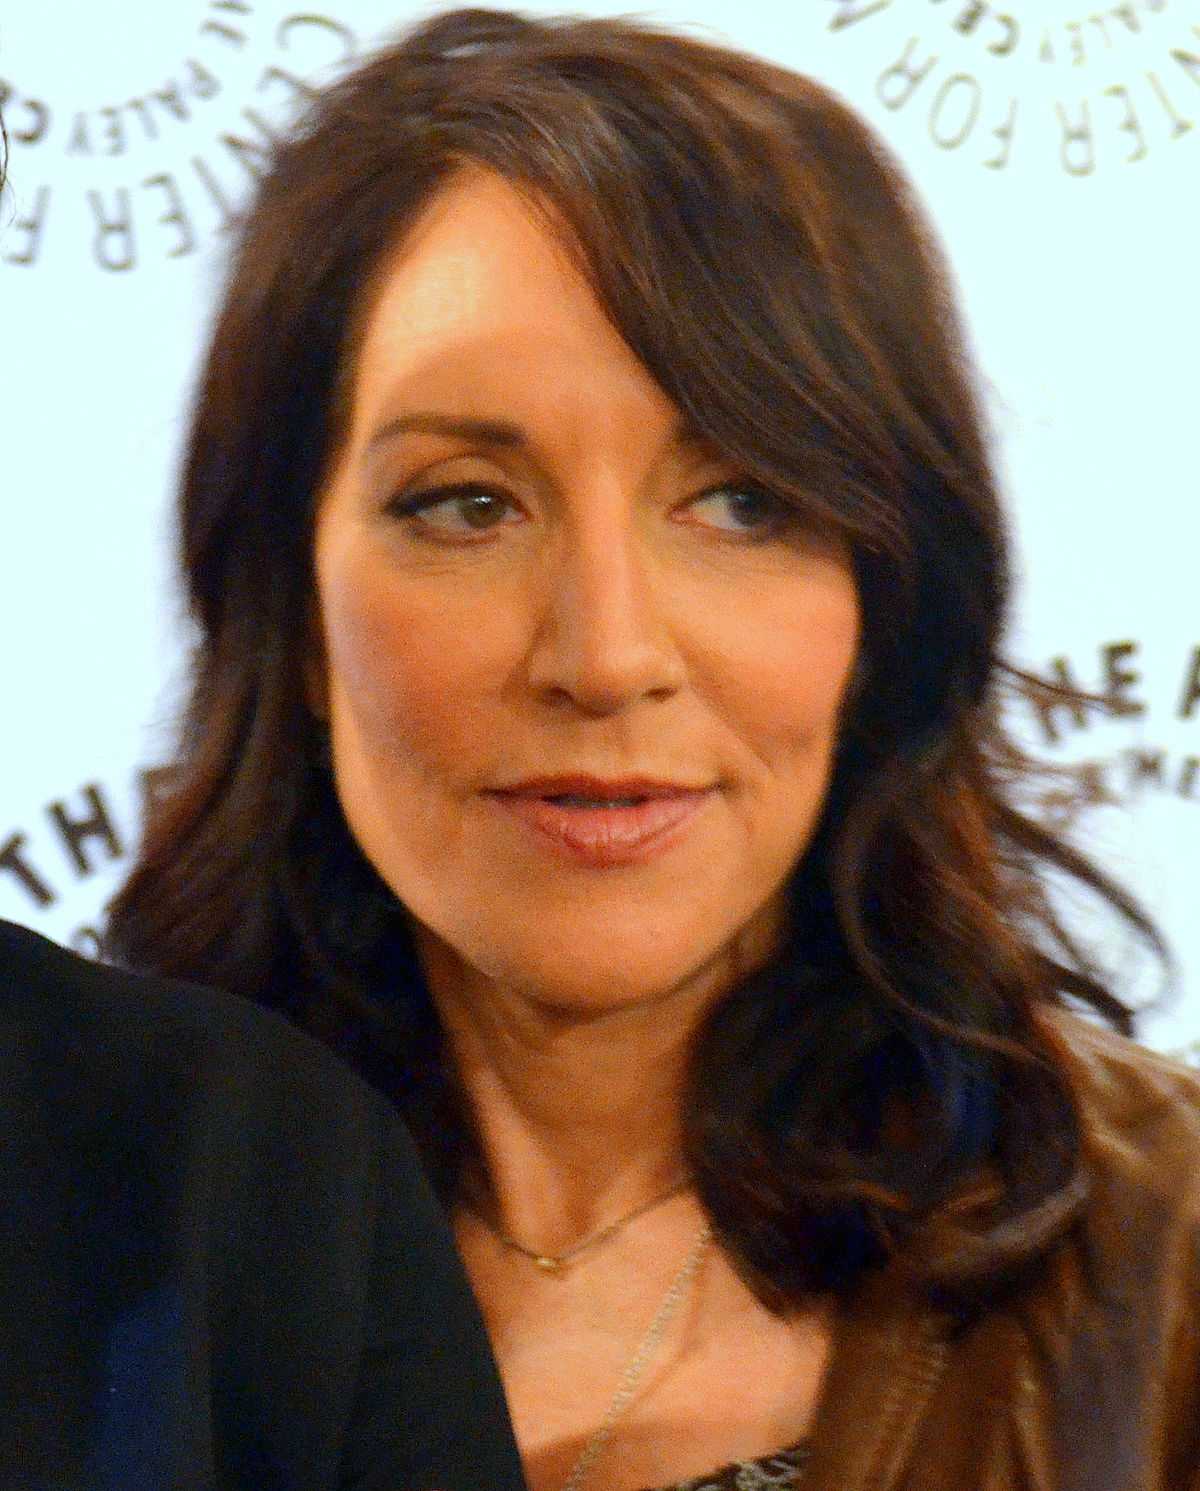 70+ Hot Pictures Of Katey Sagal Are Sexy As Hell 4